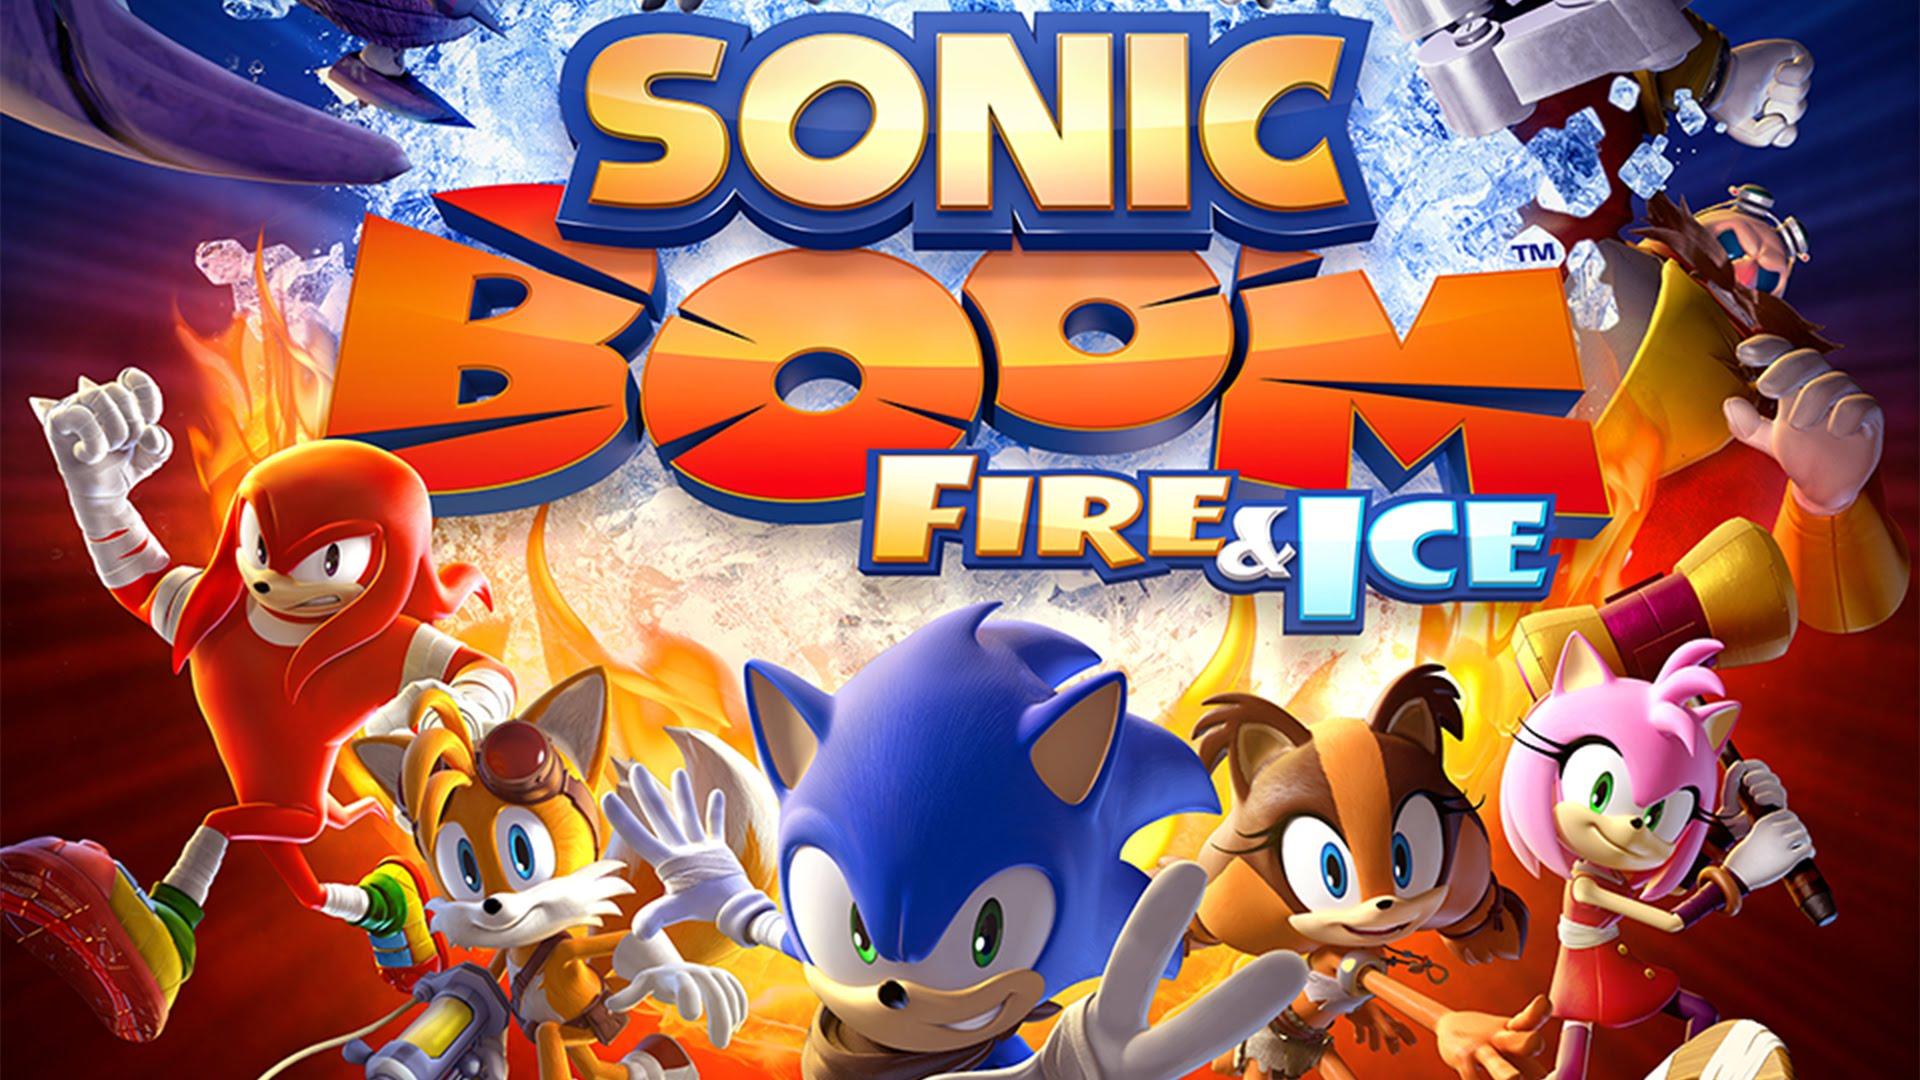 Wallpaper Blink of Sonic Boom Wallpaper HD for Android